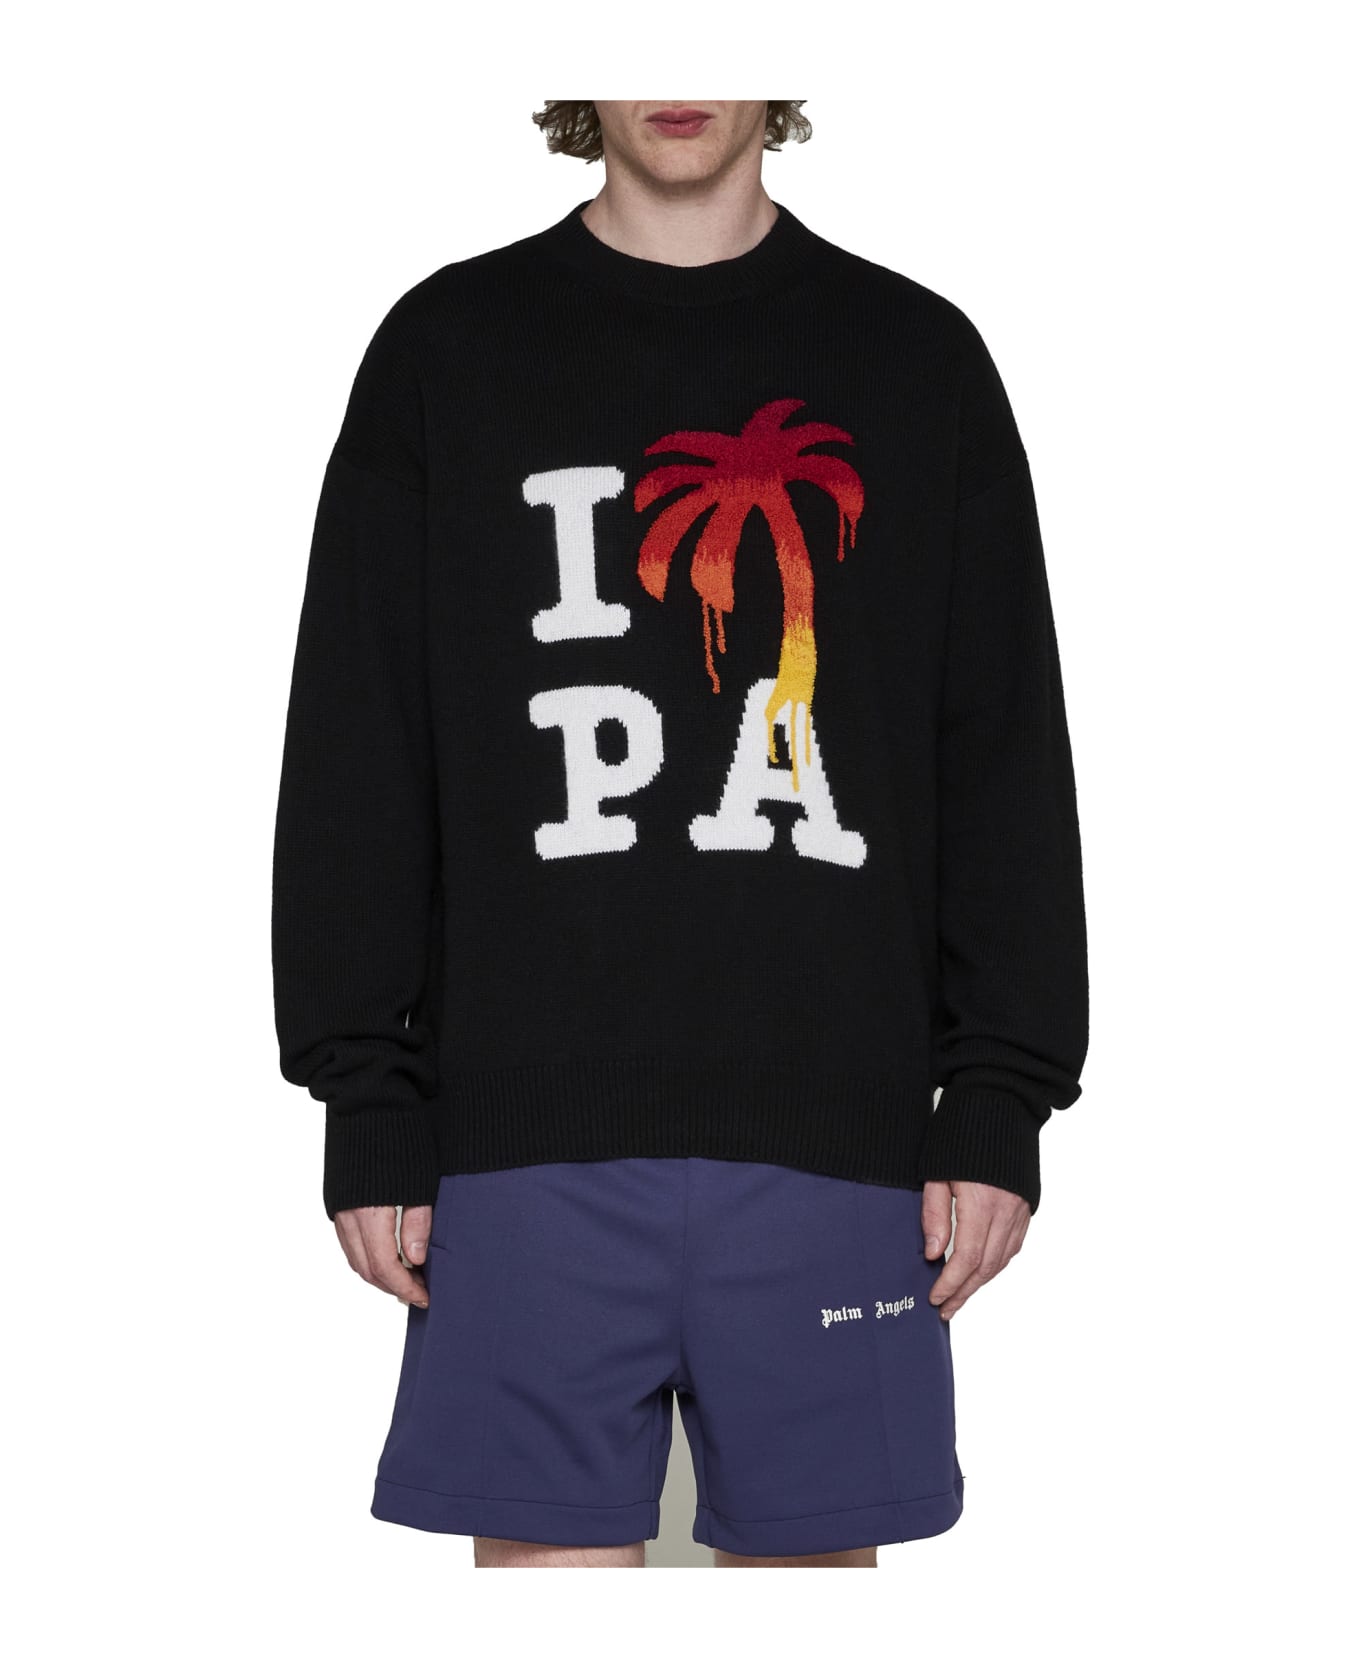 Palm Angels 'i Love Pa' Sweater - Black Red